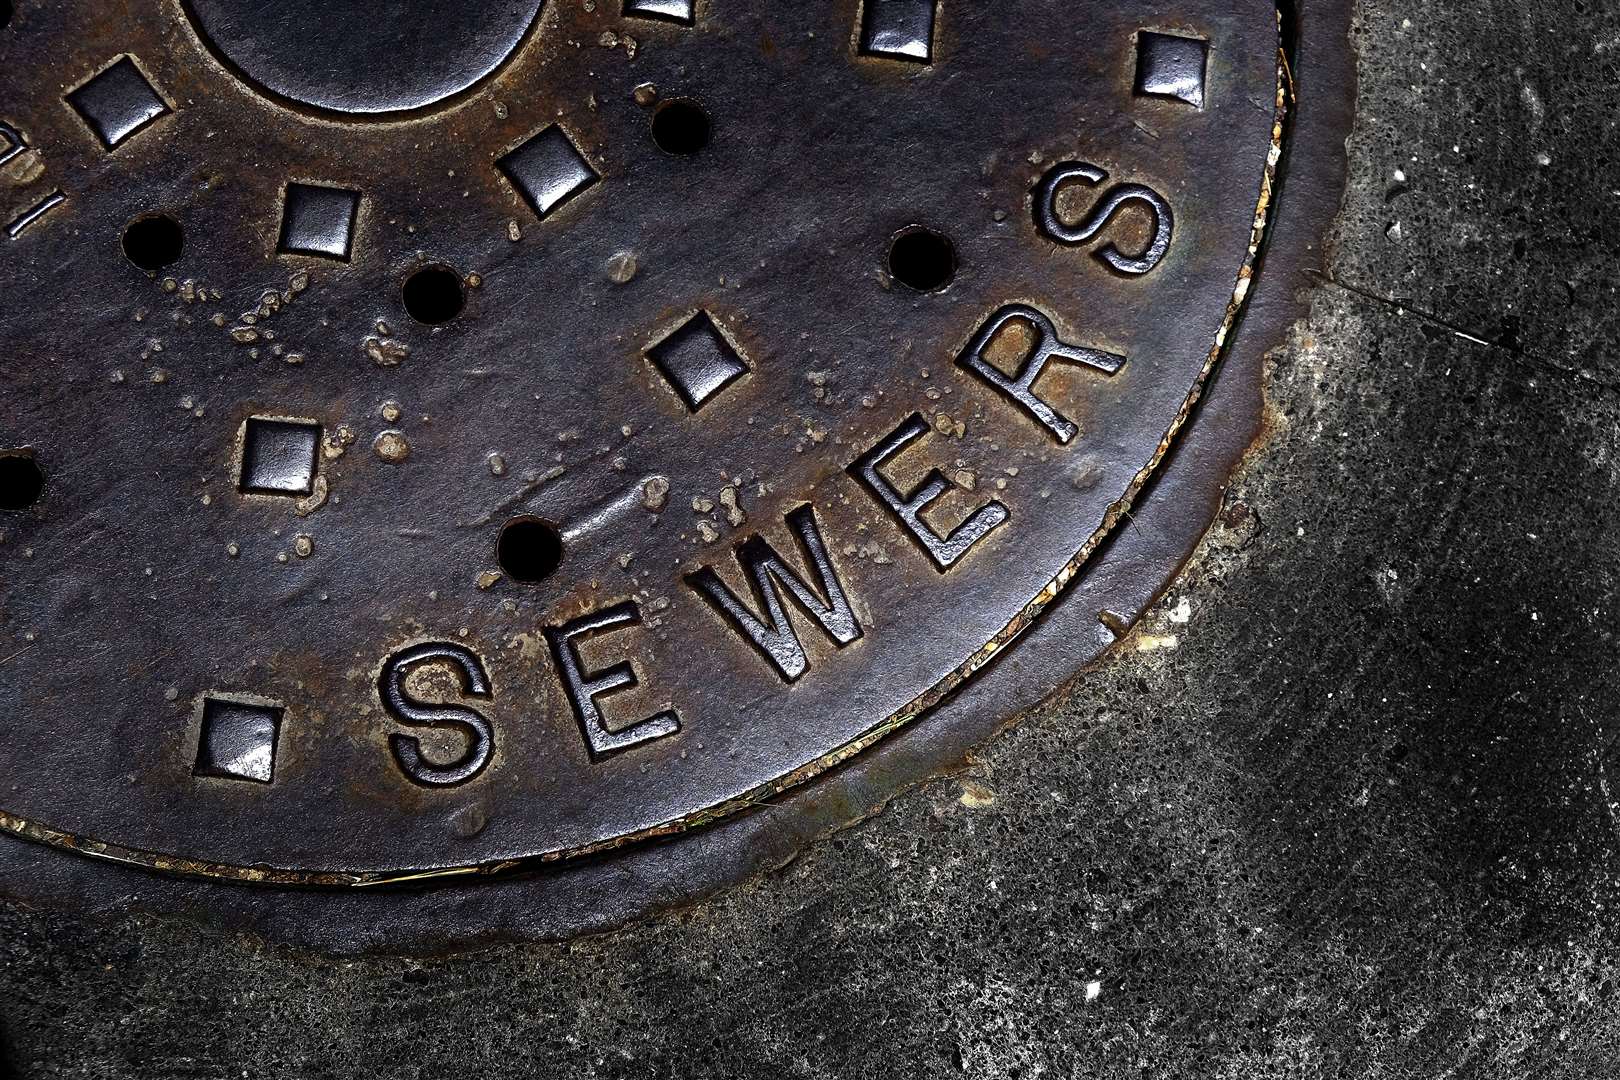 What noise drives you crazy? A dodgy sewer cover does it for me. Stock picture